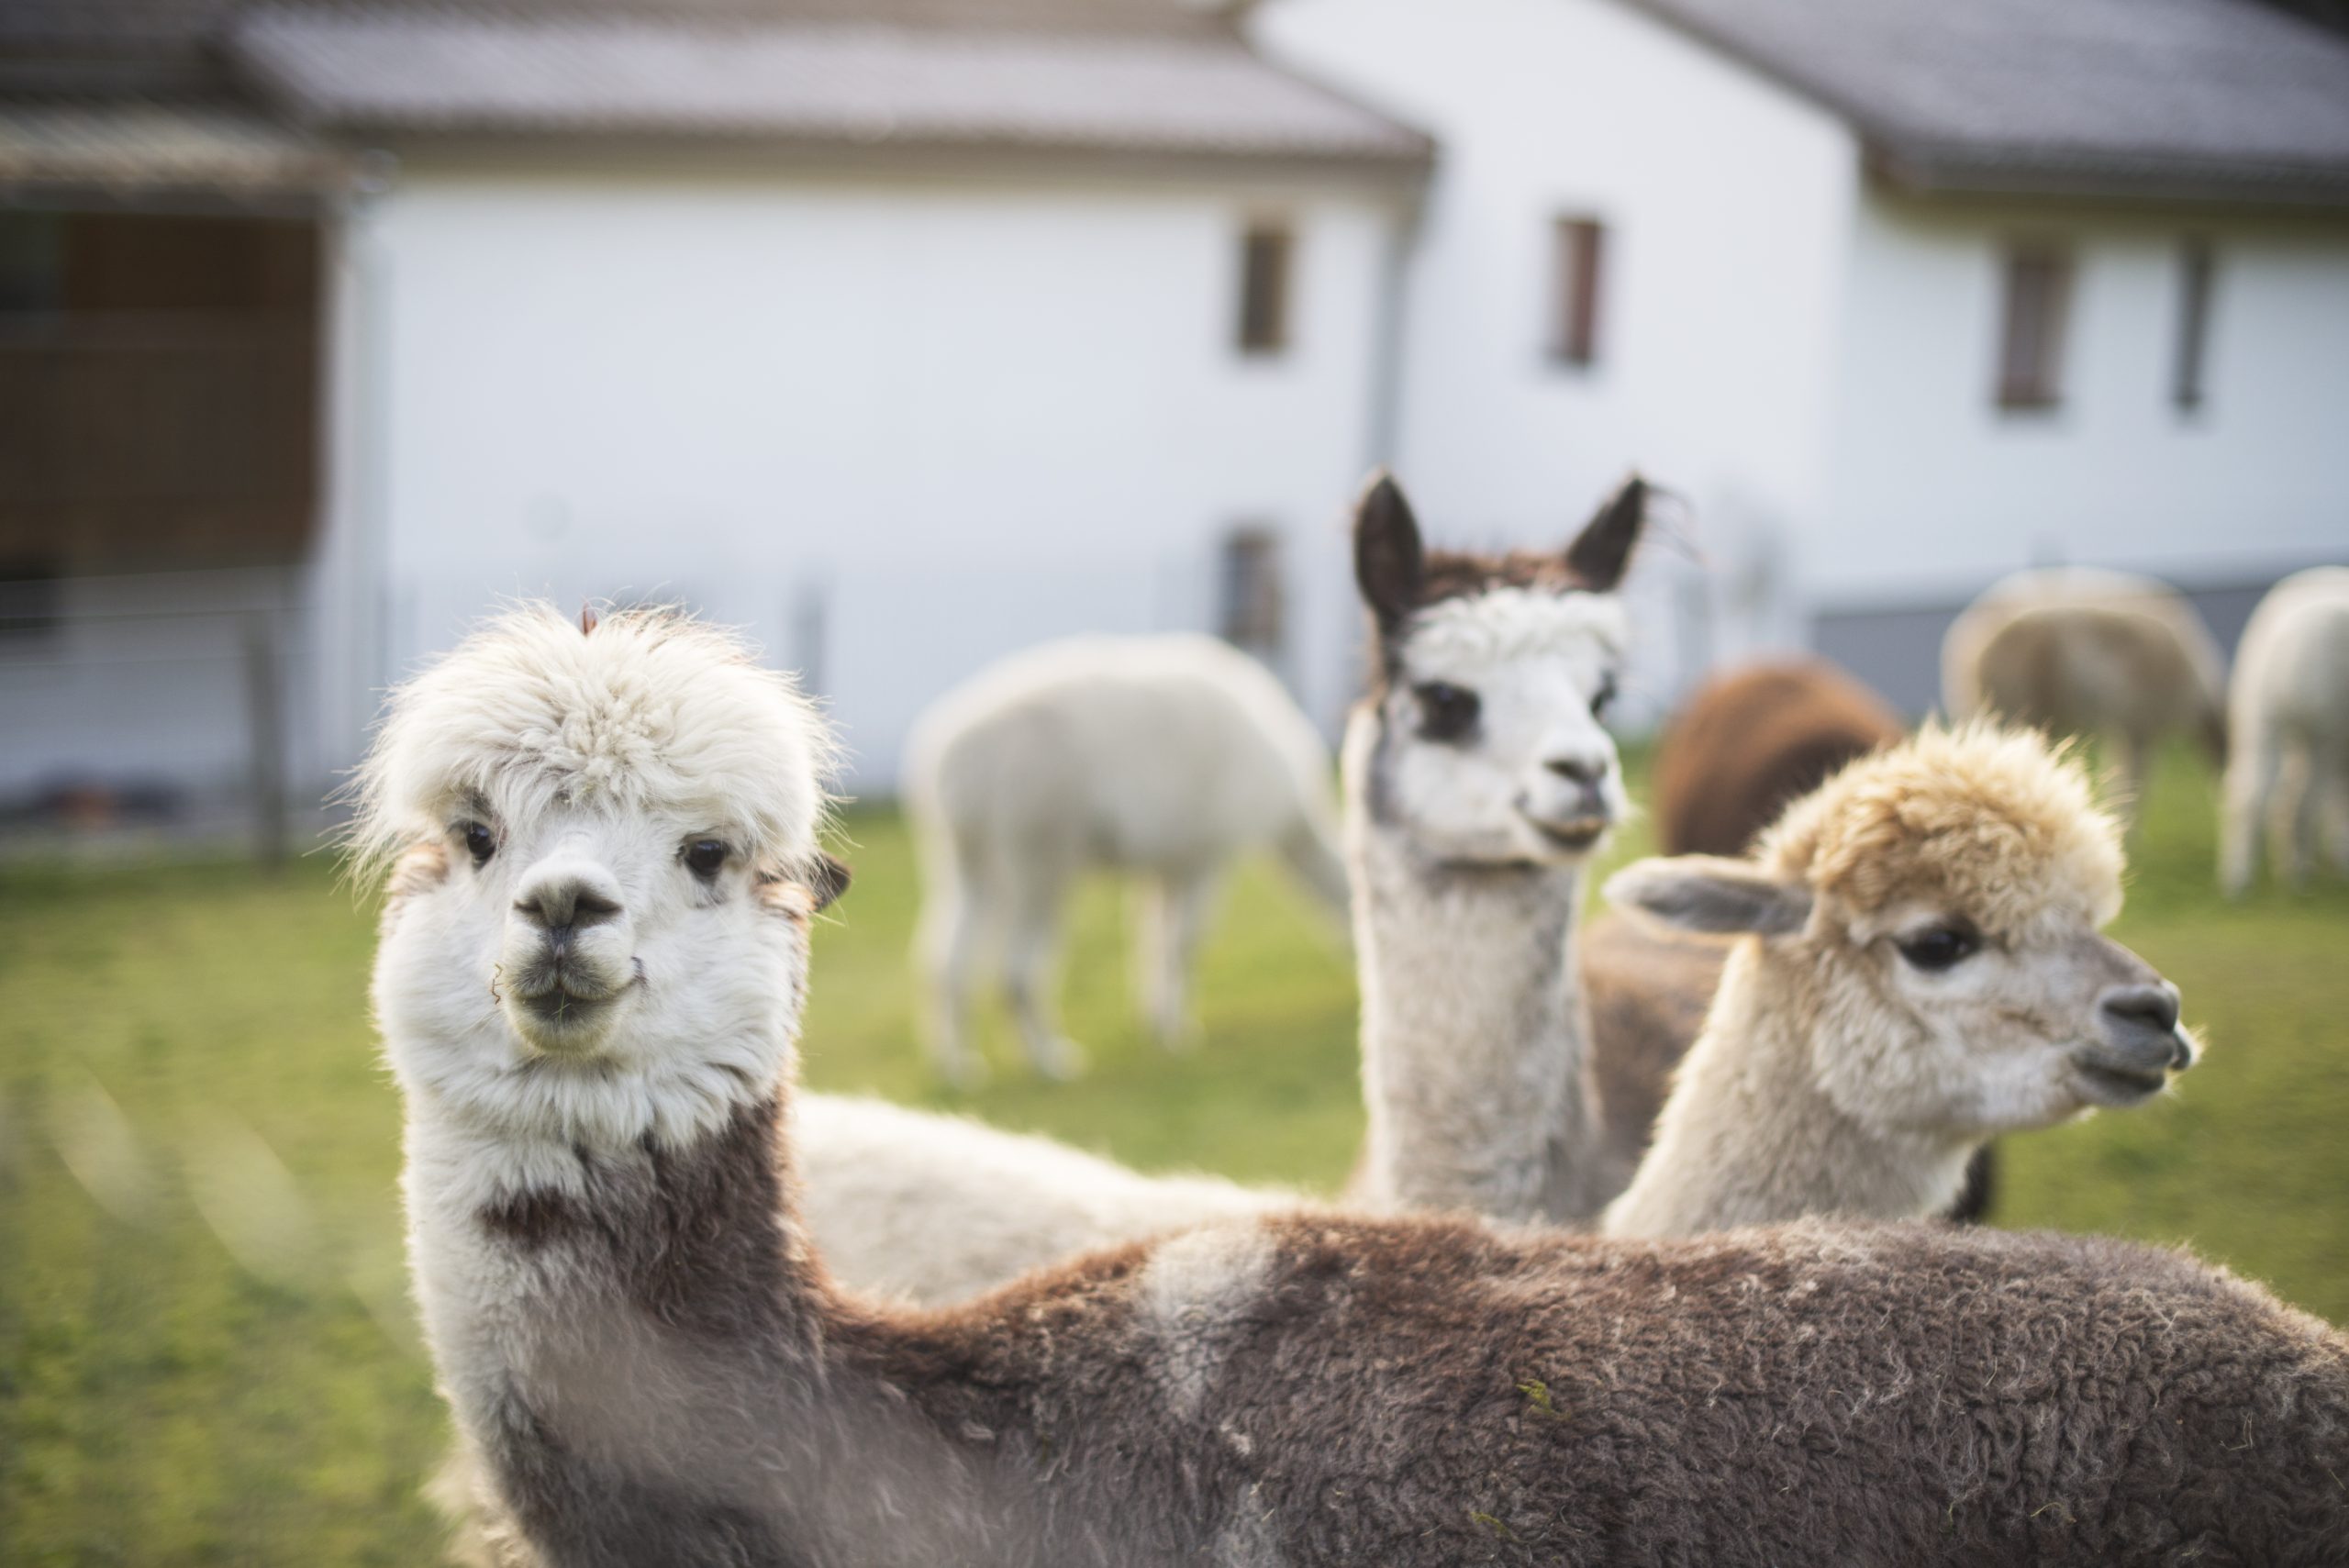 Young alpacas graze and feed on a lawn